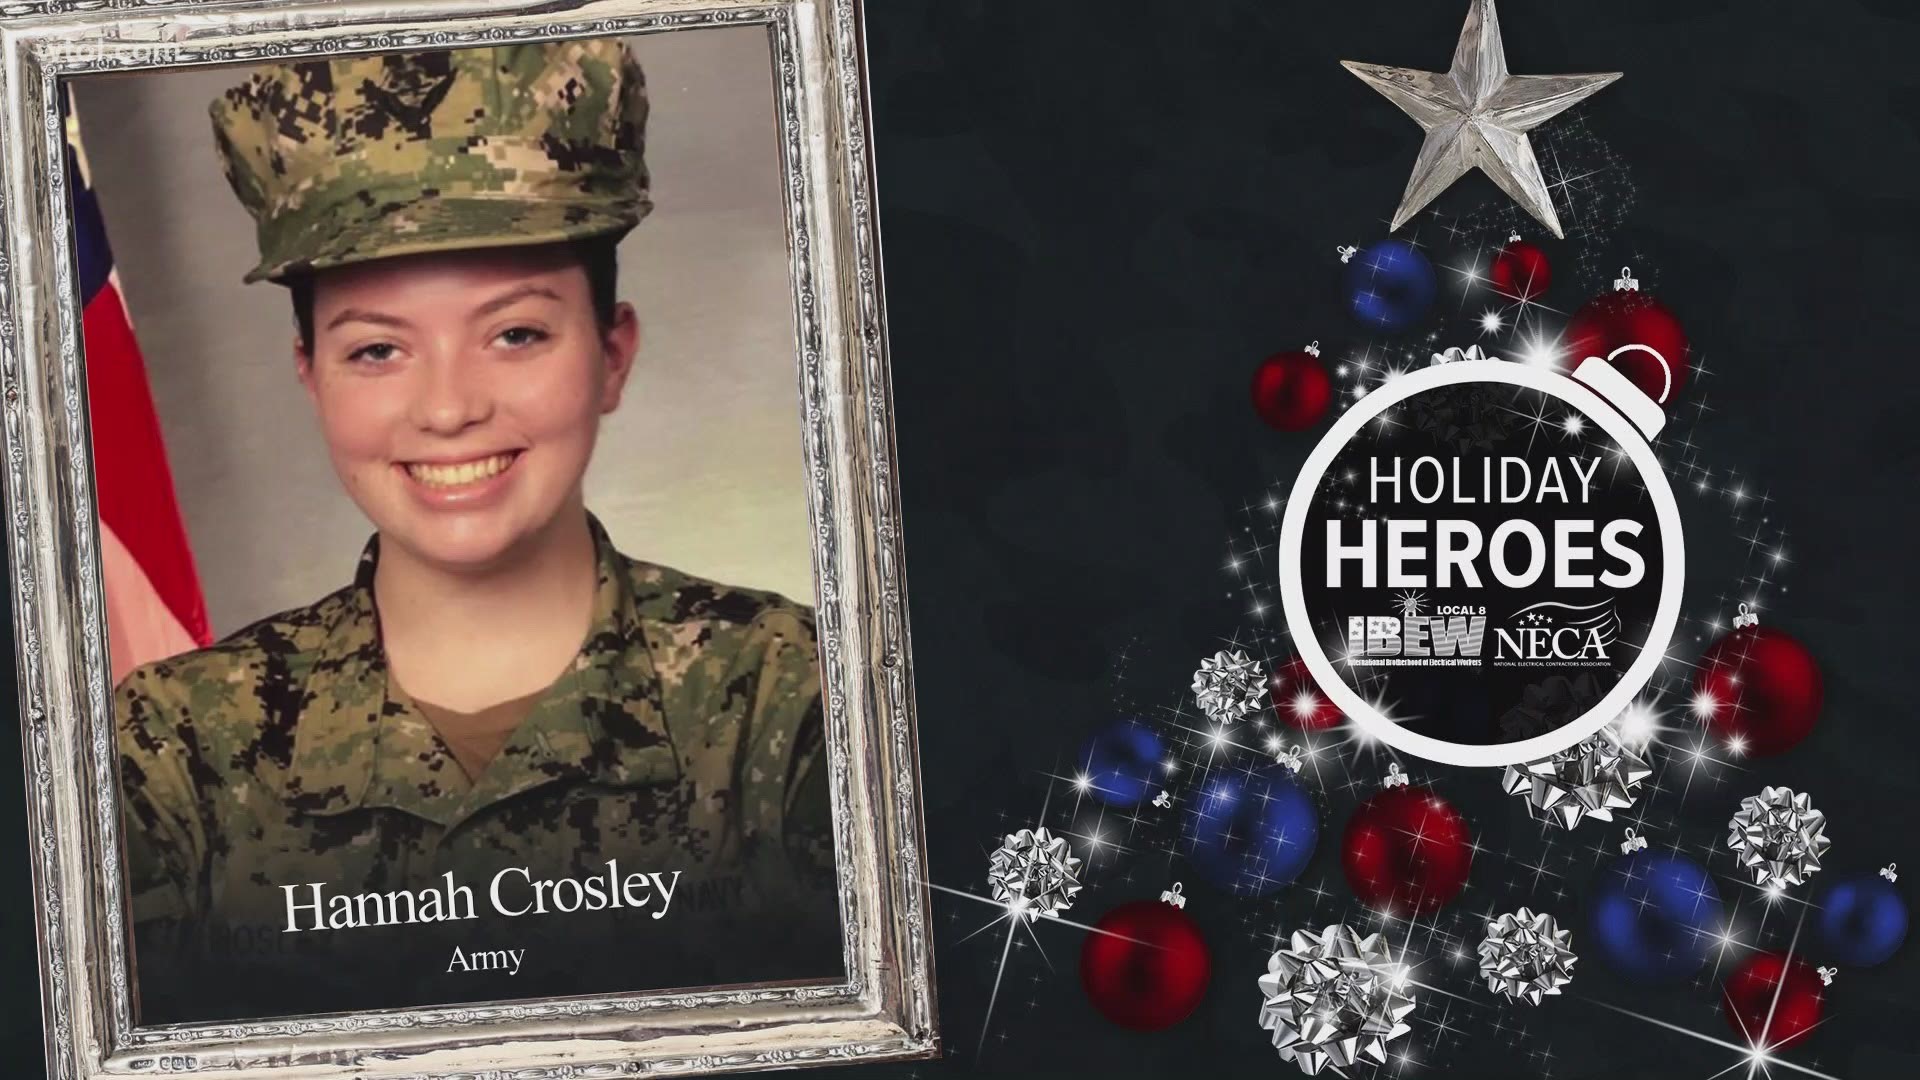 Let's take a moment now to honor Wednesday's holiday hero, Hannah Crosley.